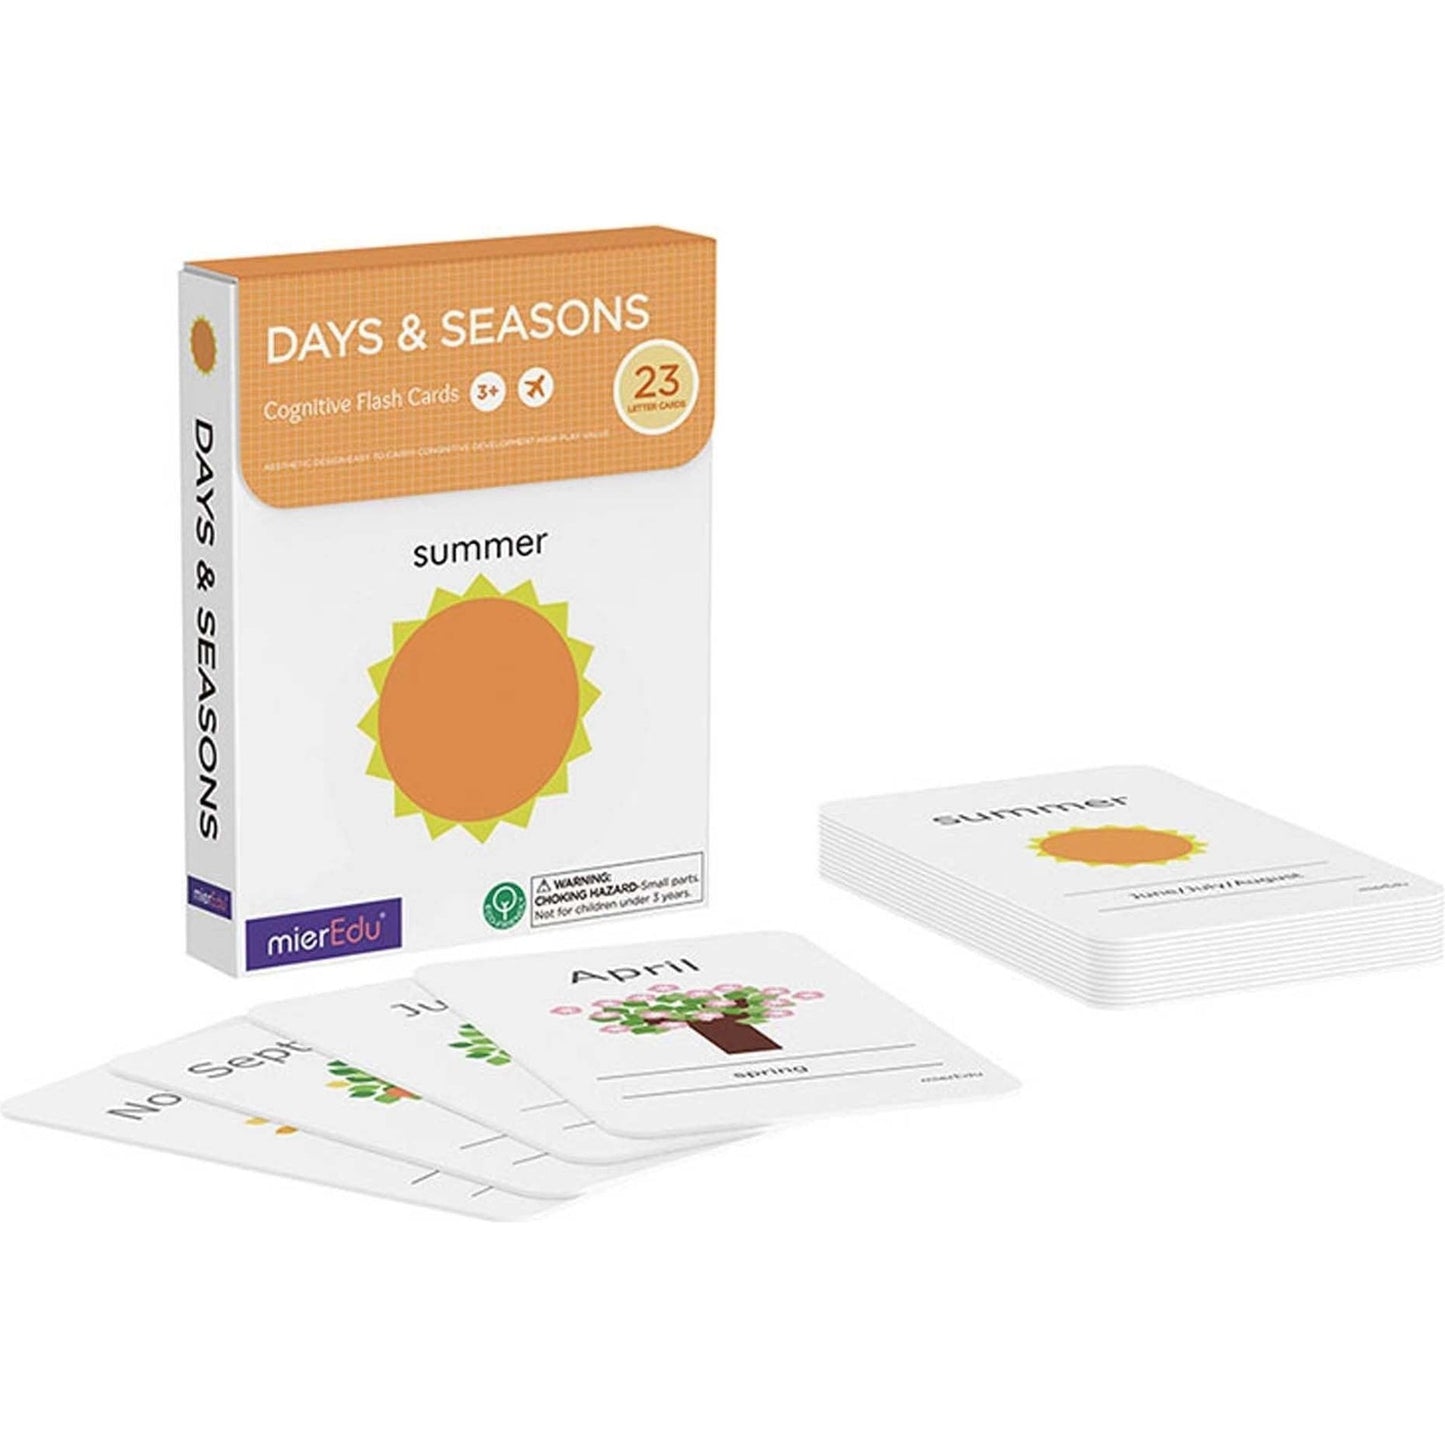 Cognitive Flash Cards - Days & Seasons - Toybox Tales